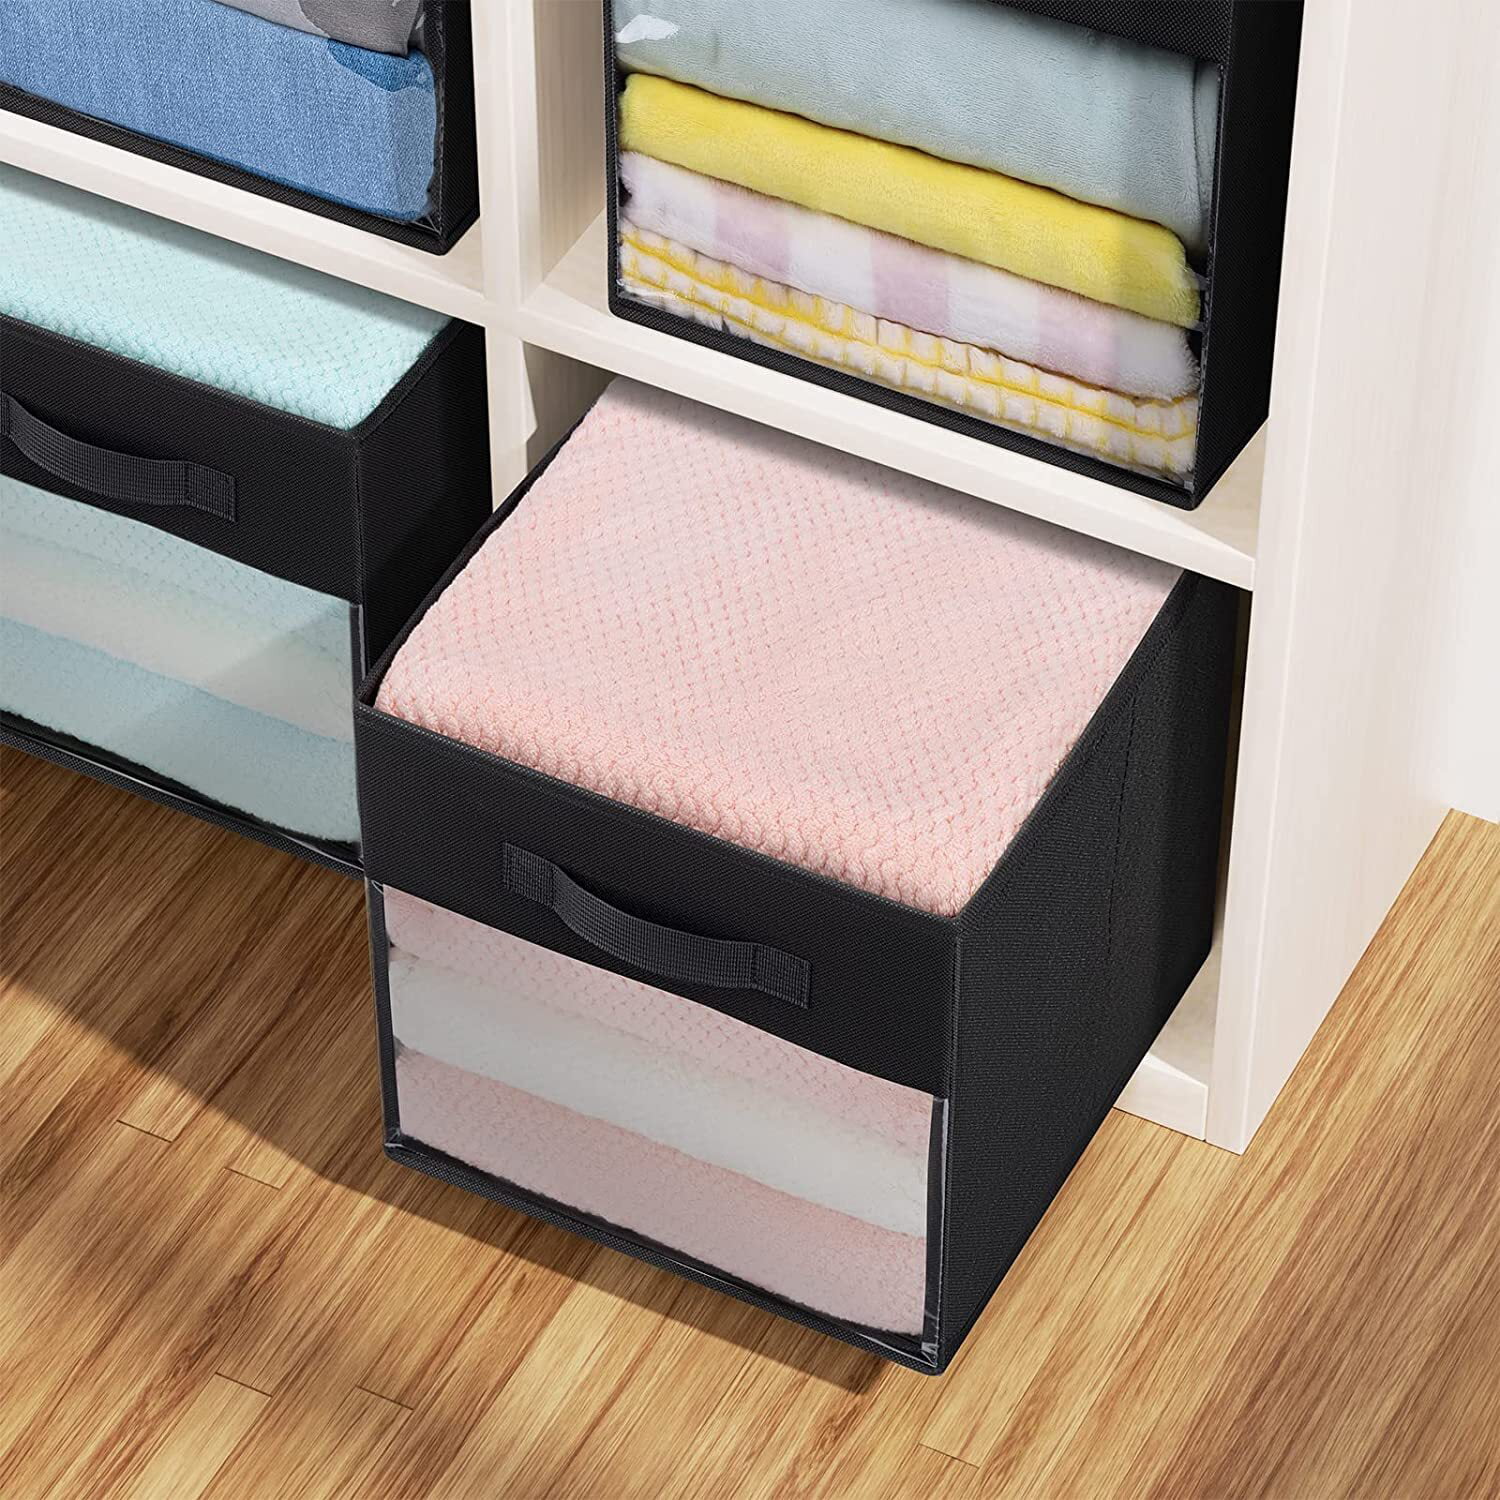 DIMJ Storage Bins with Lids, 4 Pack Fabric Storage Baskets with Handle  Collapsible Storage Box Closet Organizer with Clear Window for Clothes,  Toys, Books, Closet, Shelves, Kids Room, Office 